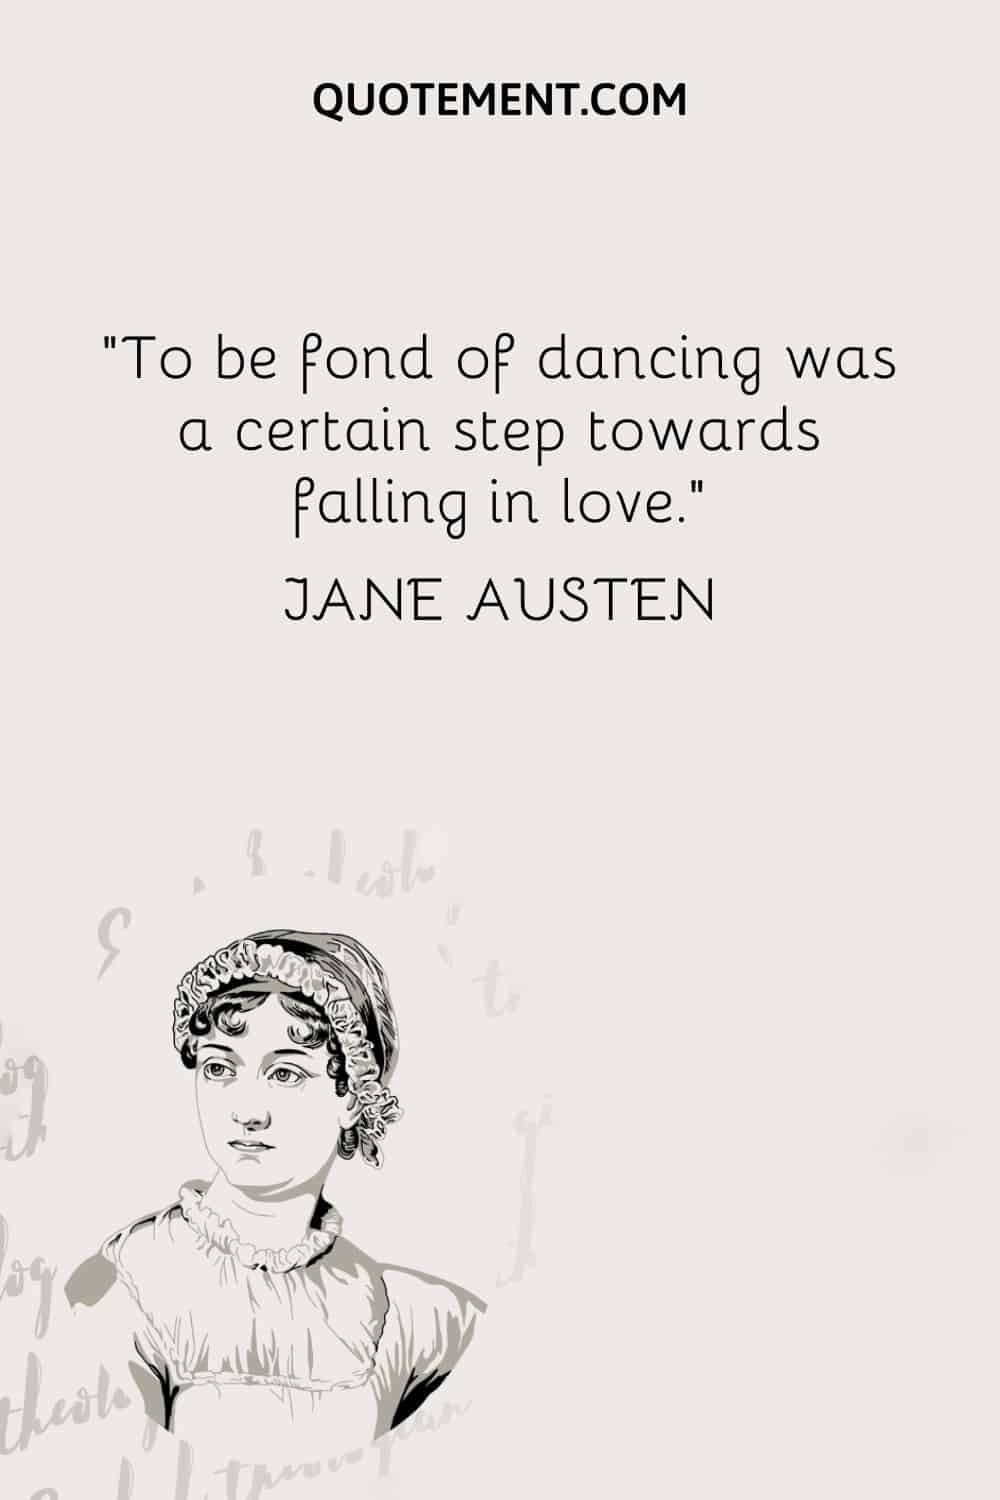 To be fond of dancing was a certain step towards falling in love. — Jane Austen